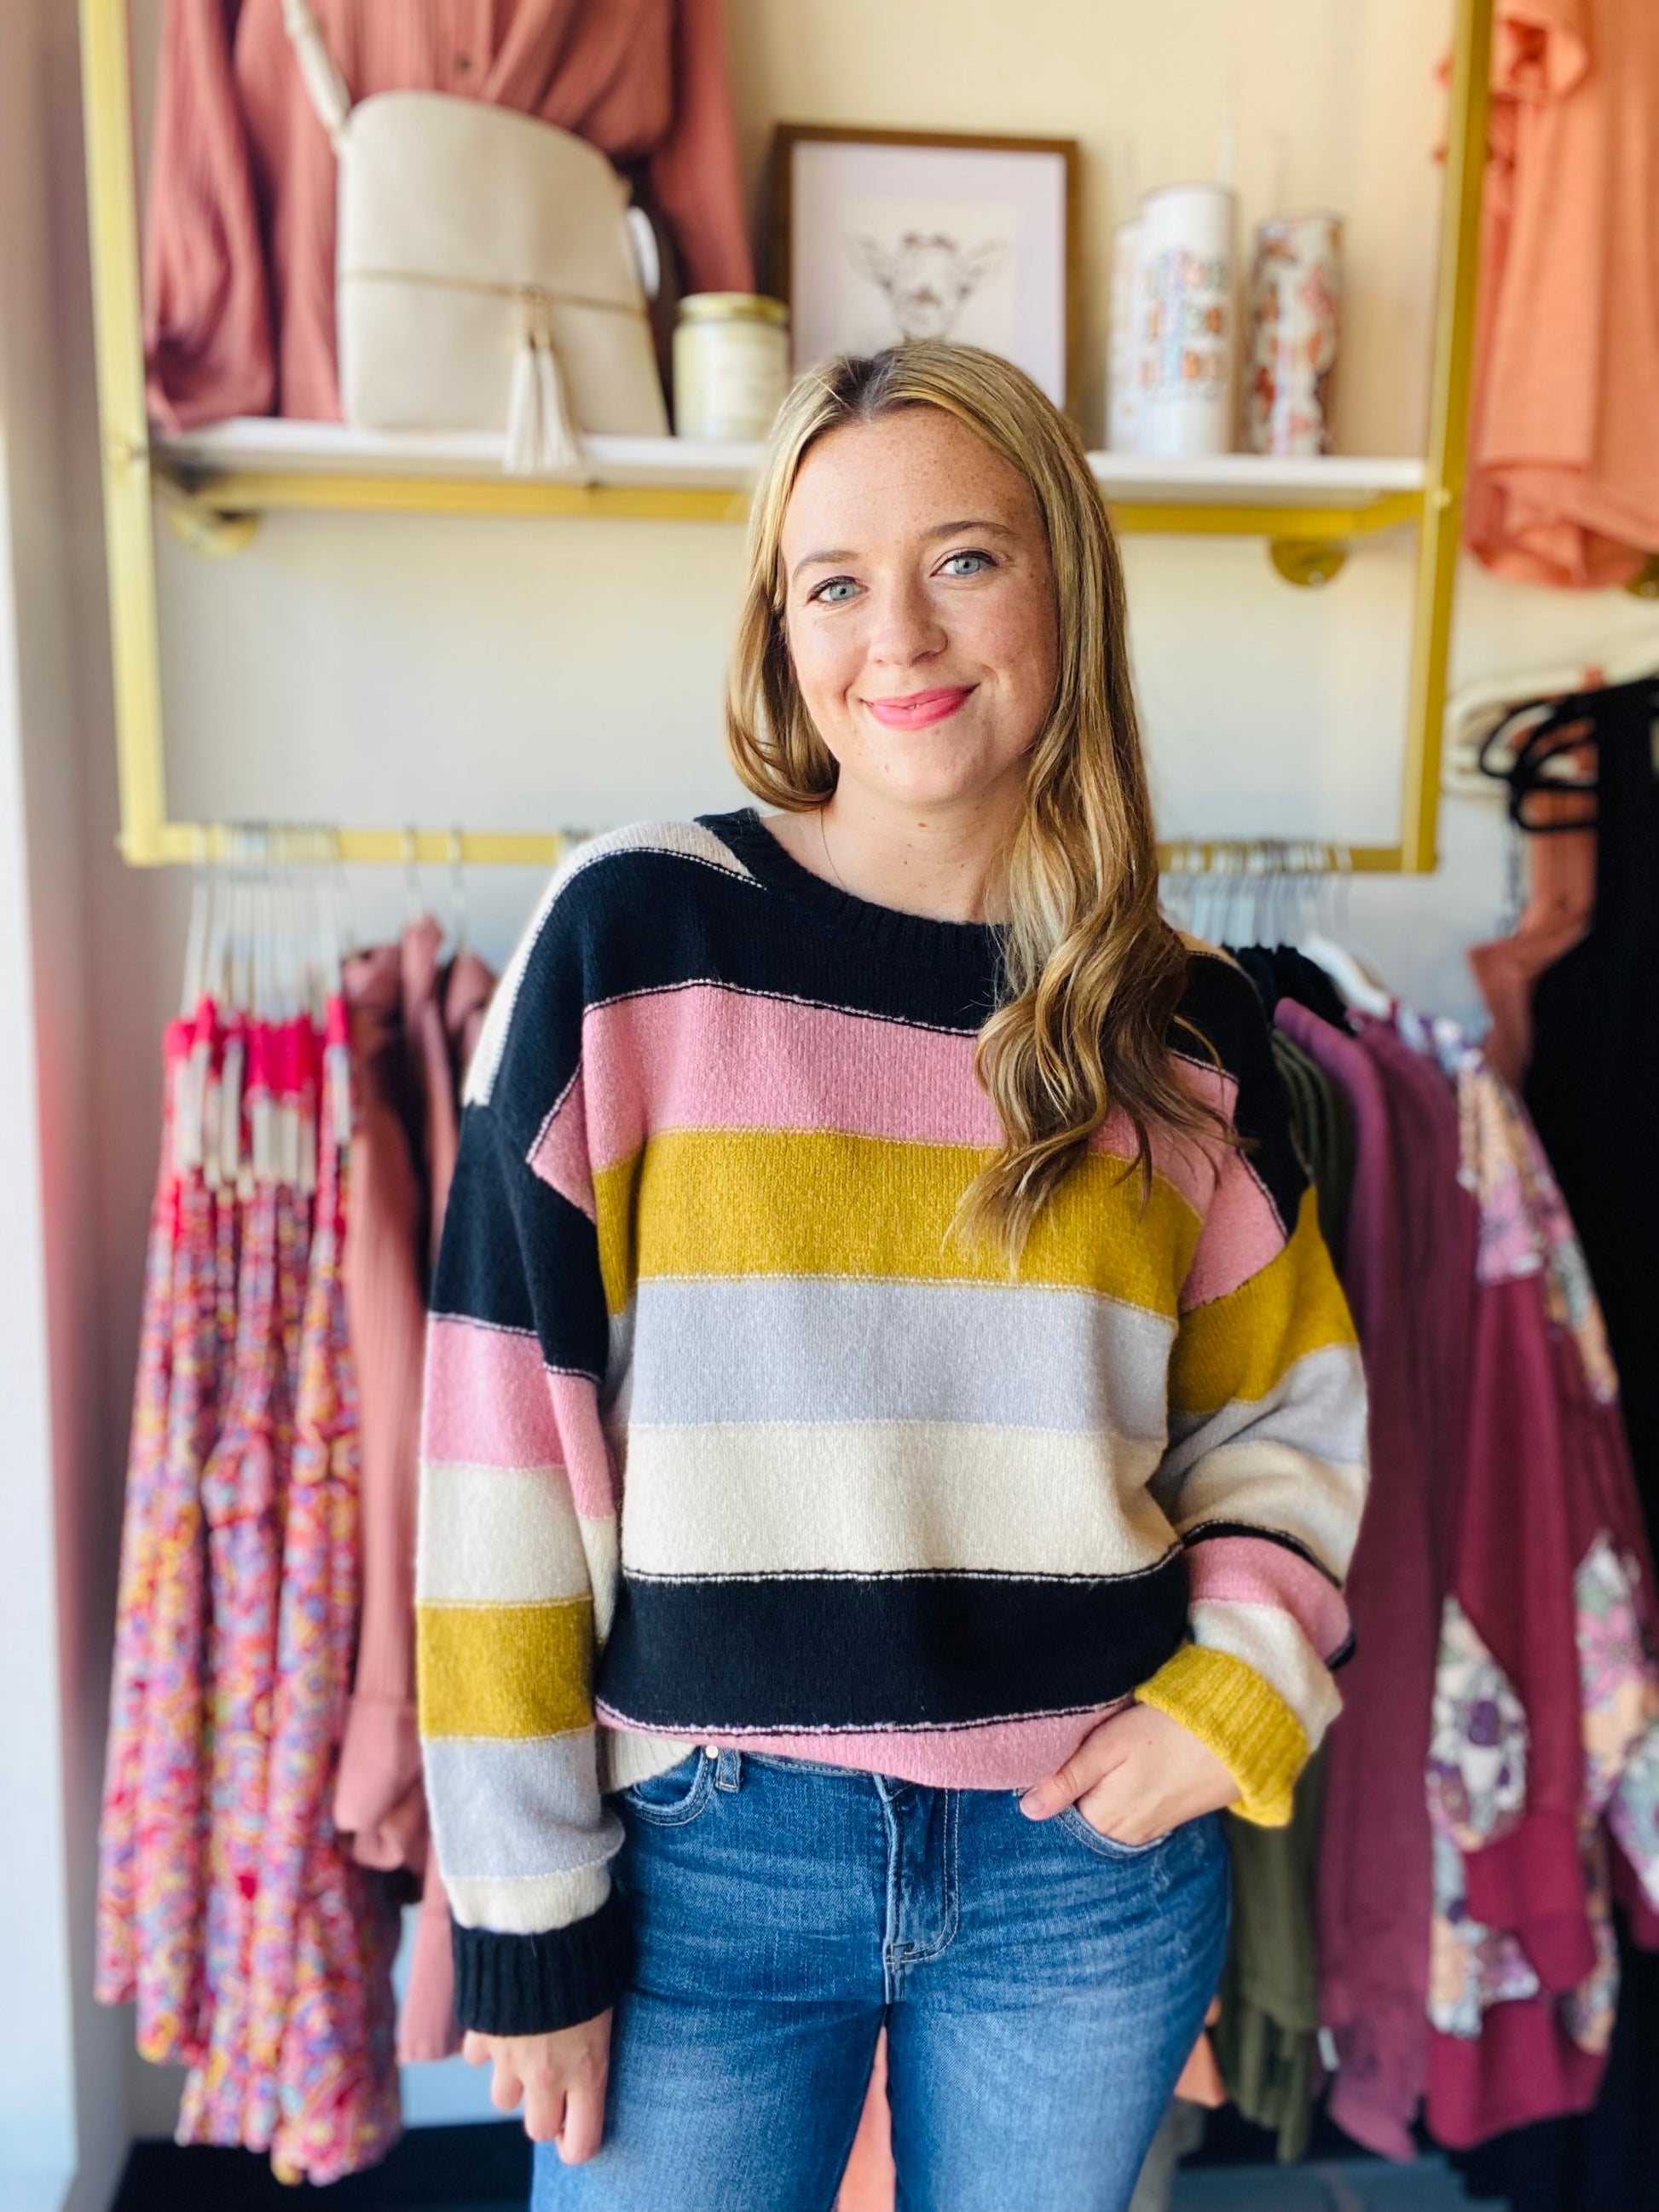 This Mustard and Mauve Striped Sweater is perfect for Fall and Winter 2023. The trendy color palette and comfortable crewneck fit mean you can style this sweater with anything. The warm acrylic fabric pairs easily with both black pants for work and denim for an everyday look.